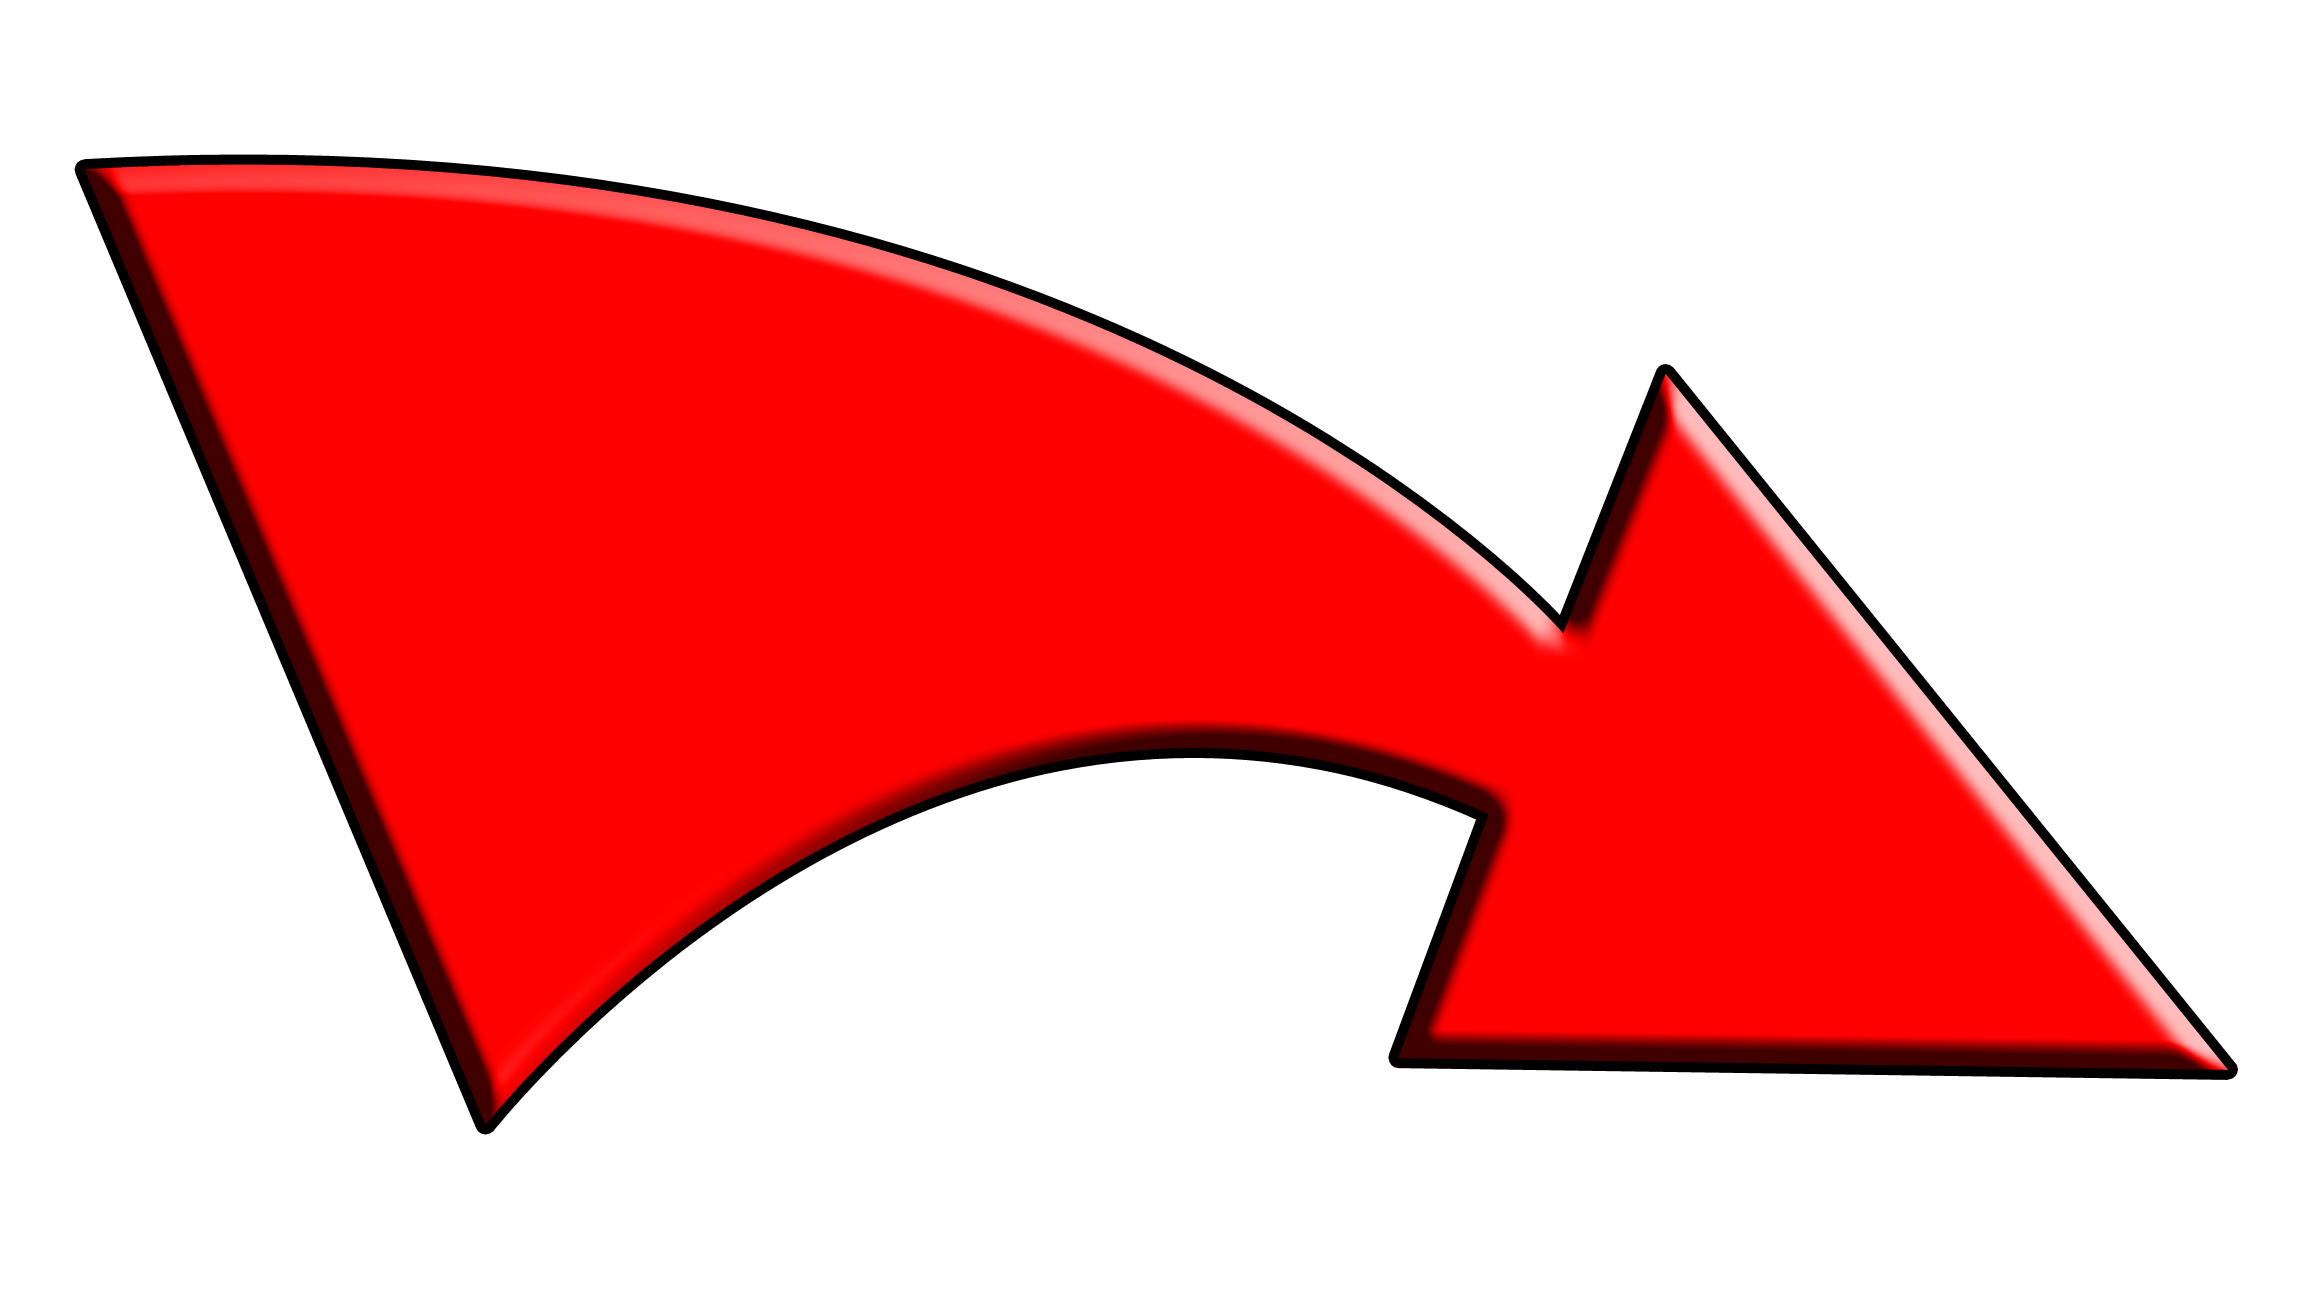 White with Red Arrow Logo - Red arrow image